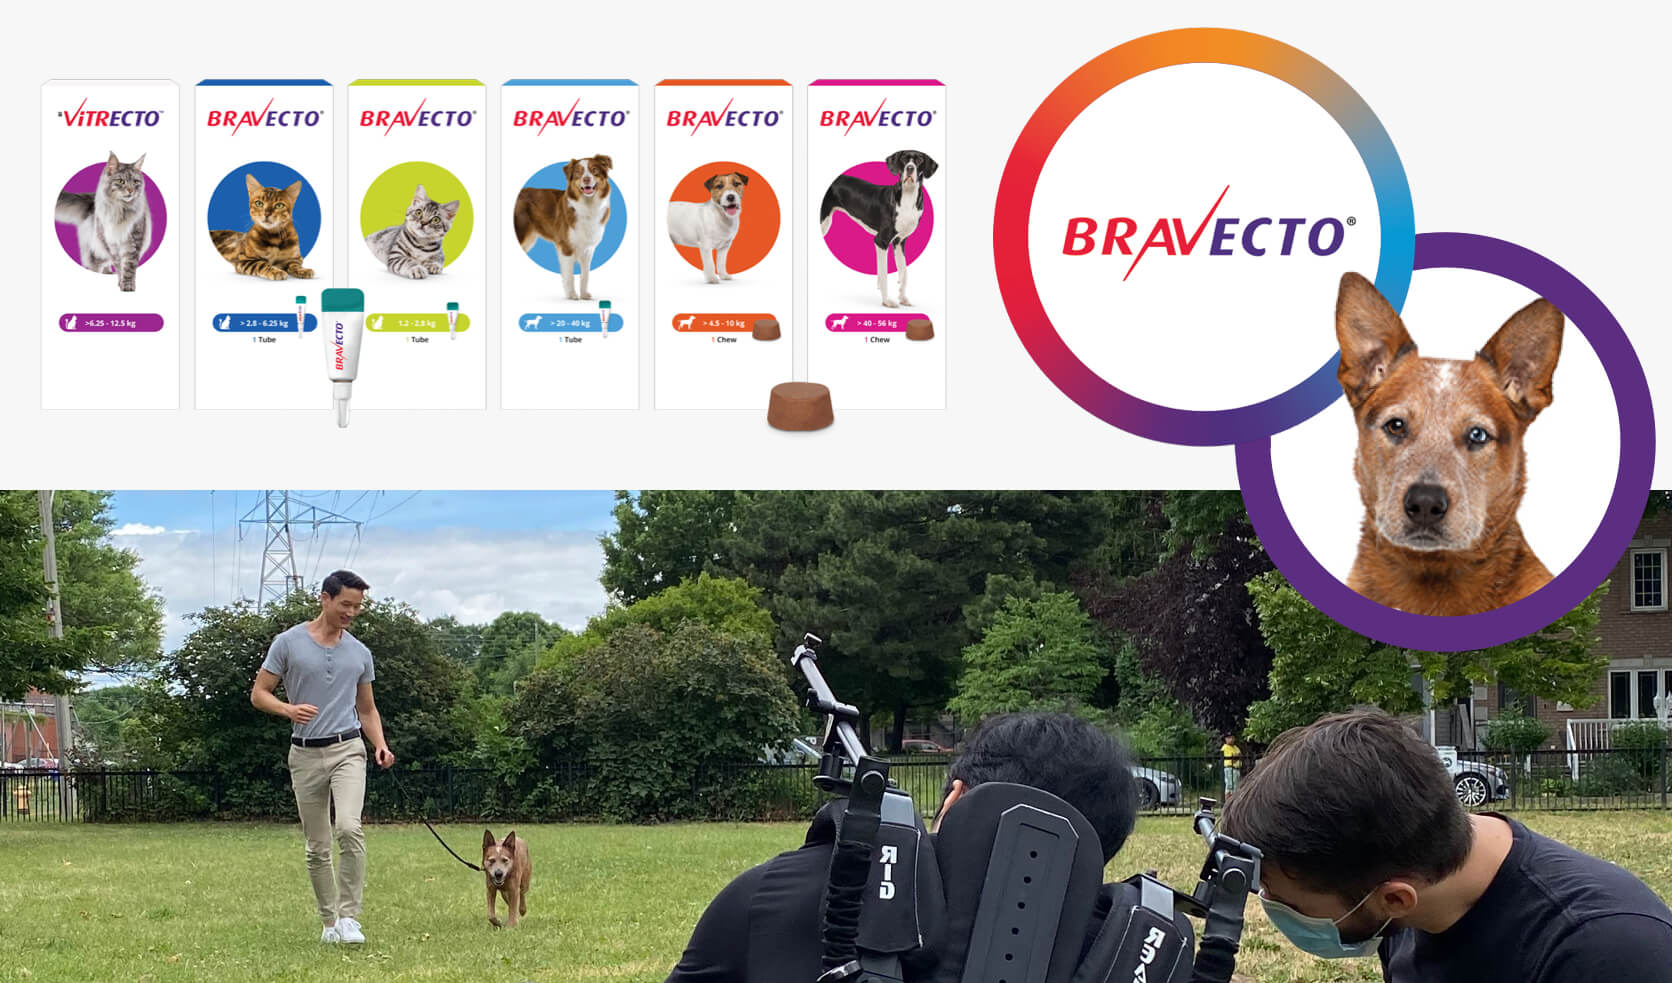 Behind the scenes shooting of Bravecto video, along with the Bravecto Pack shots.